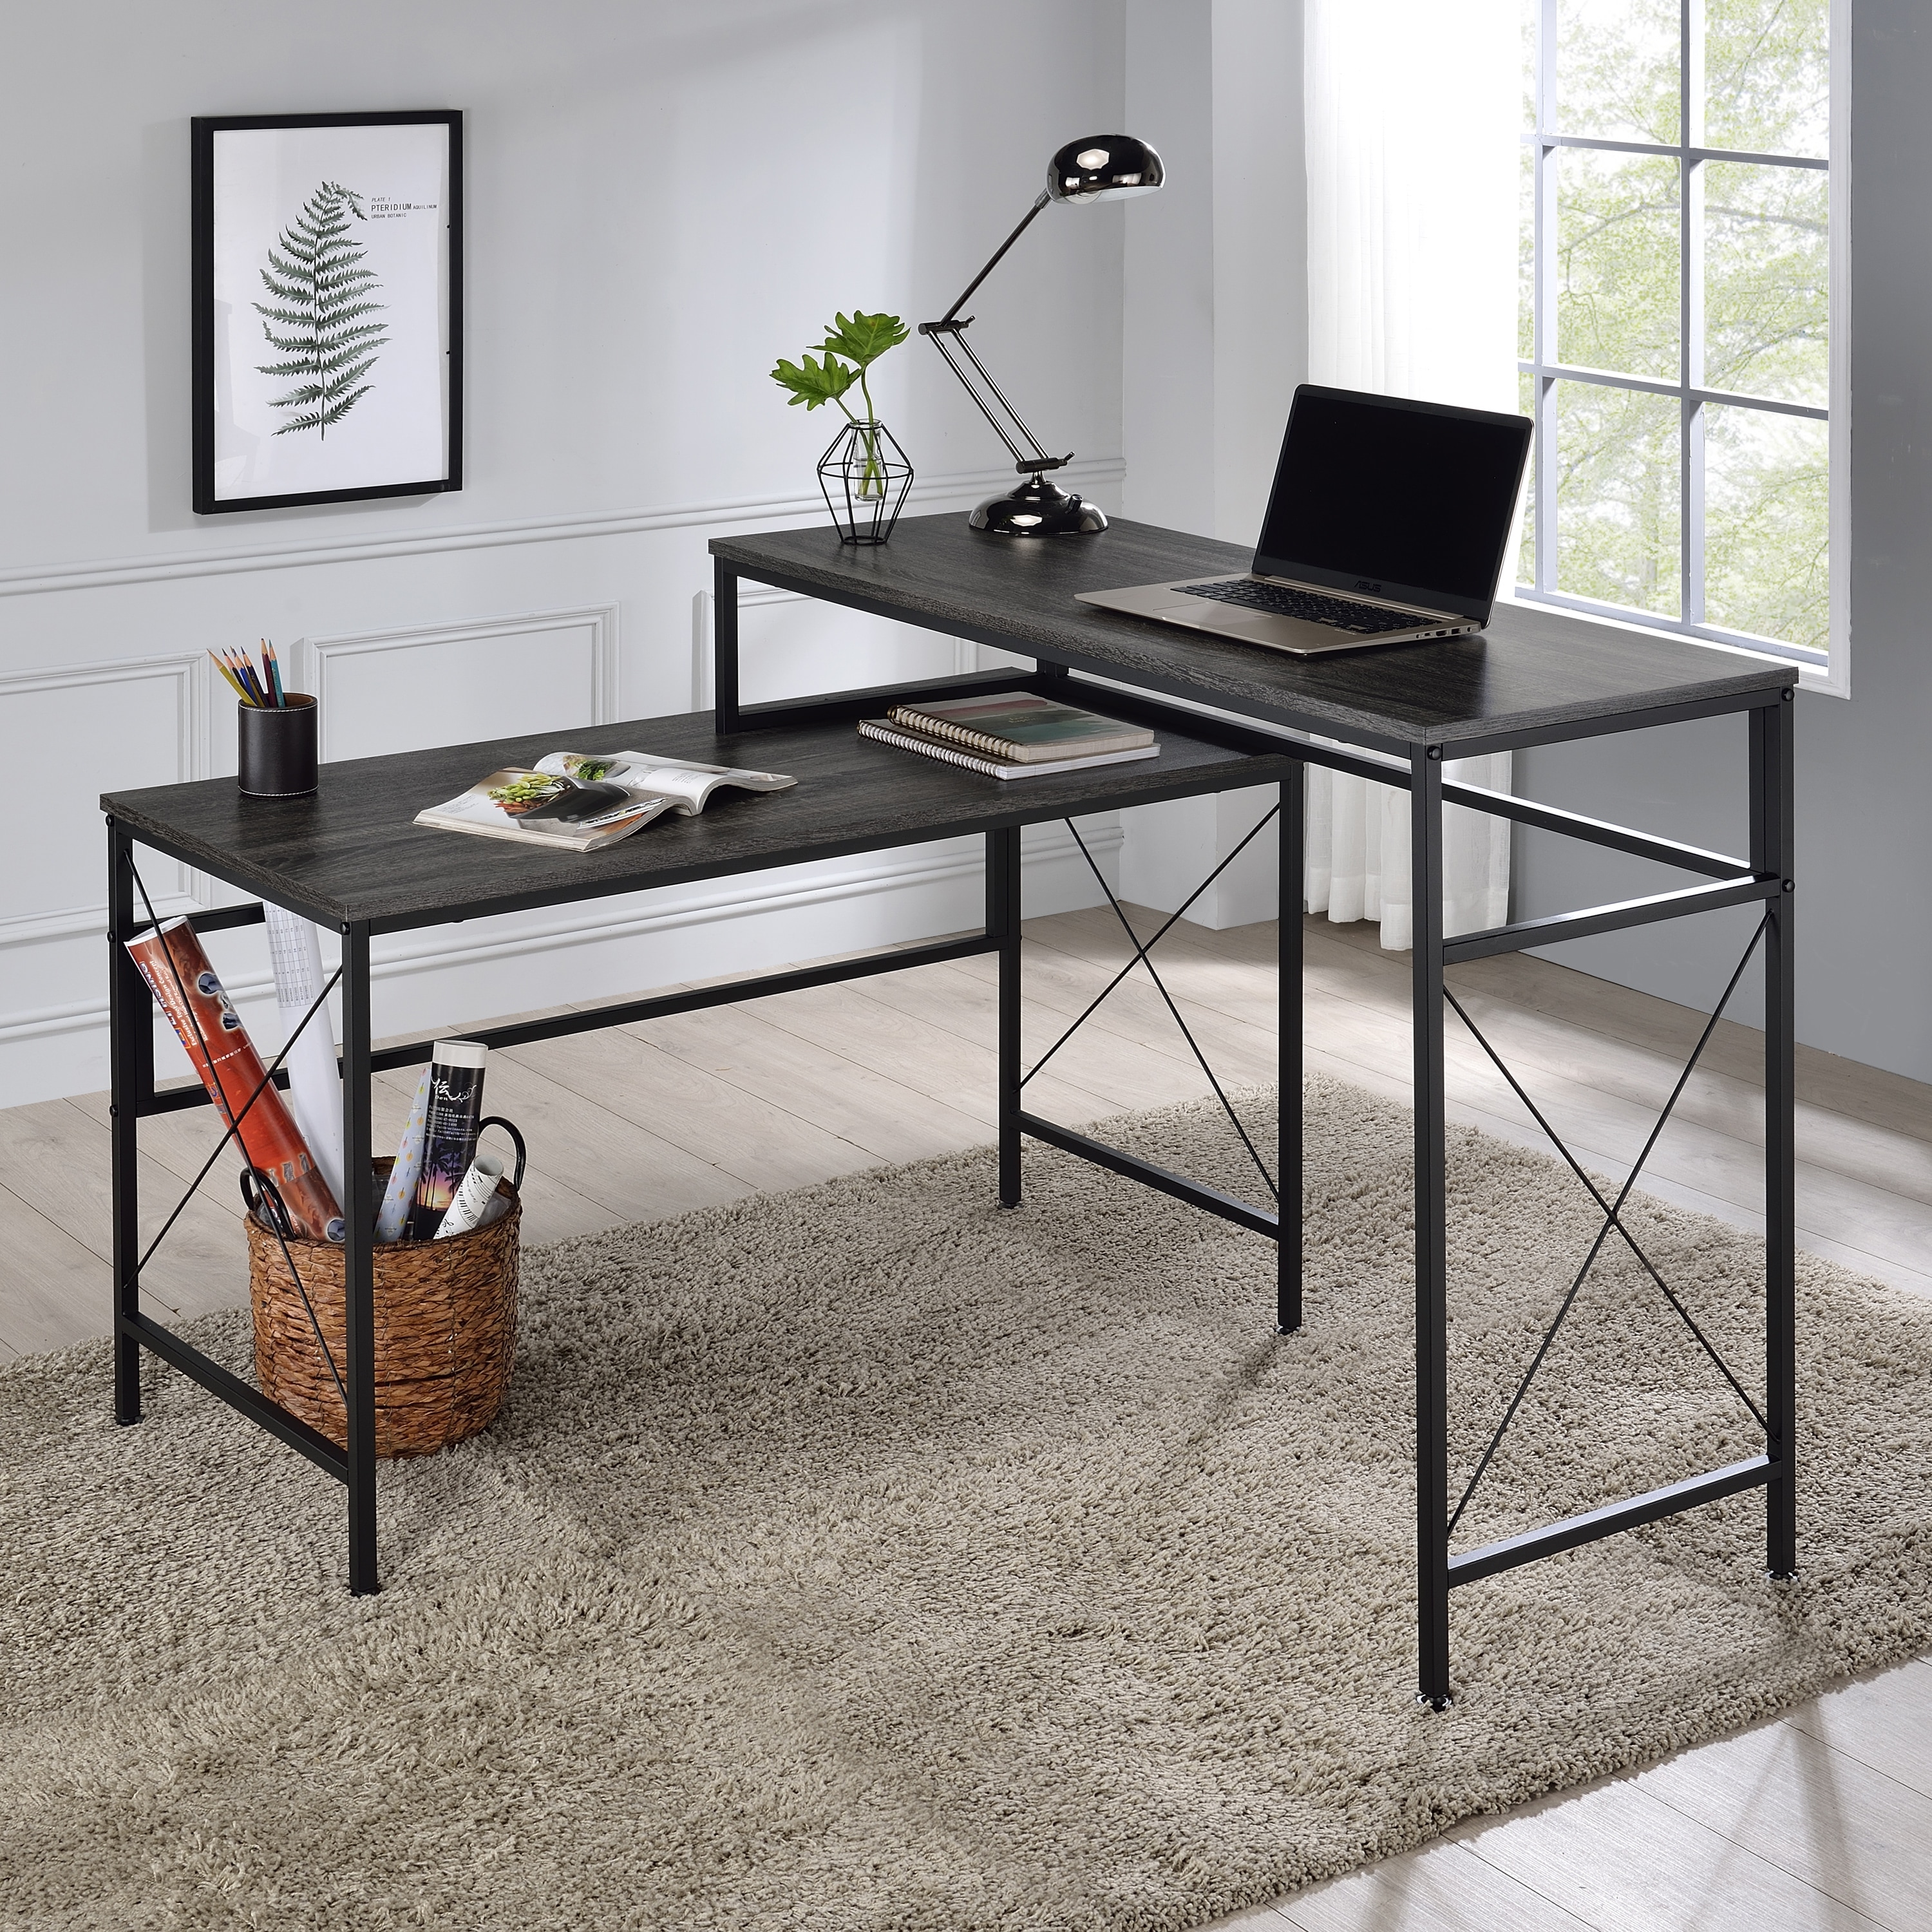 Featured image of post Grey L Shaped Desk - The desk is made from mdf and wood veneer with sturdy metal accents that are sure to be a stunning addition to your work space.